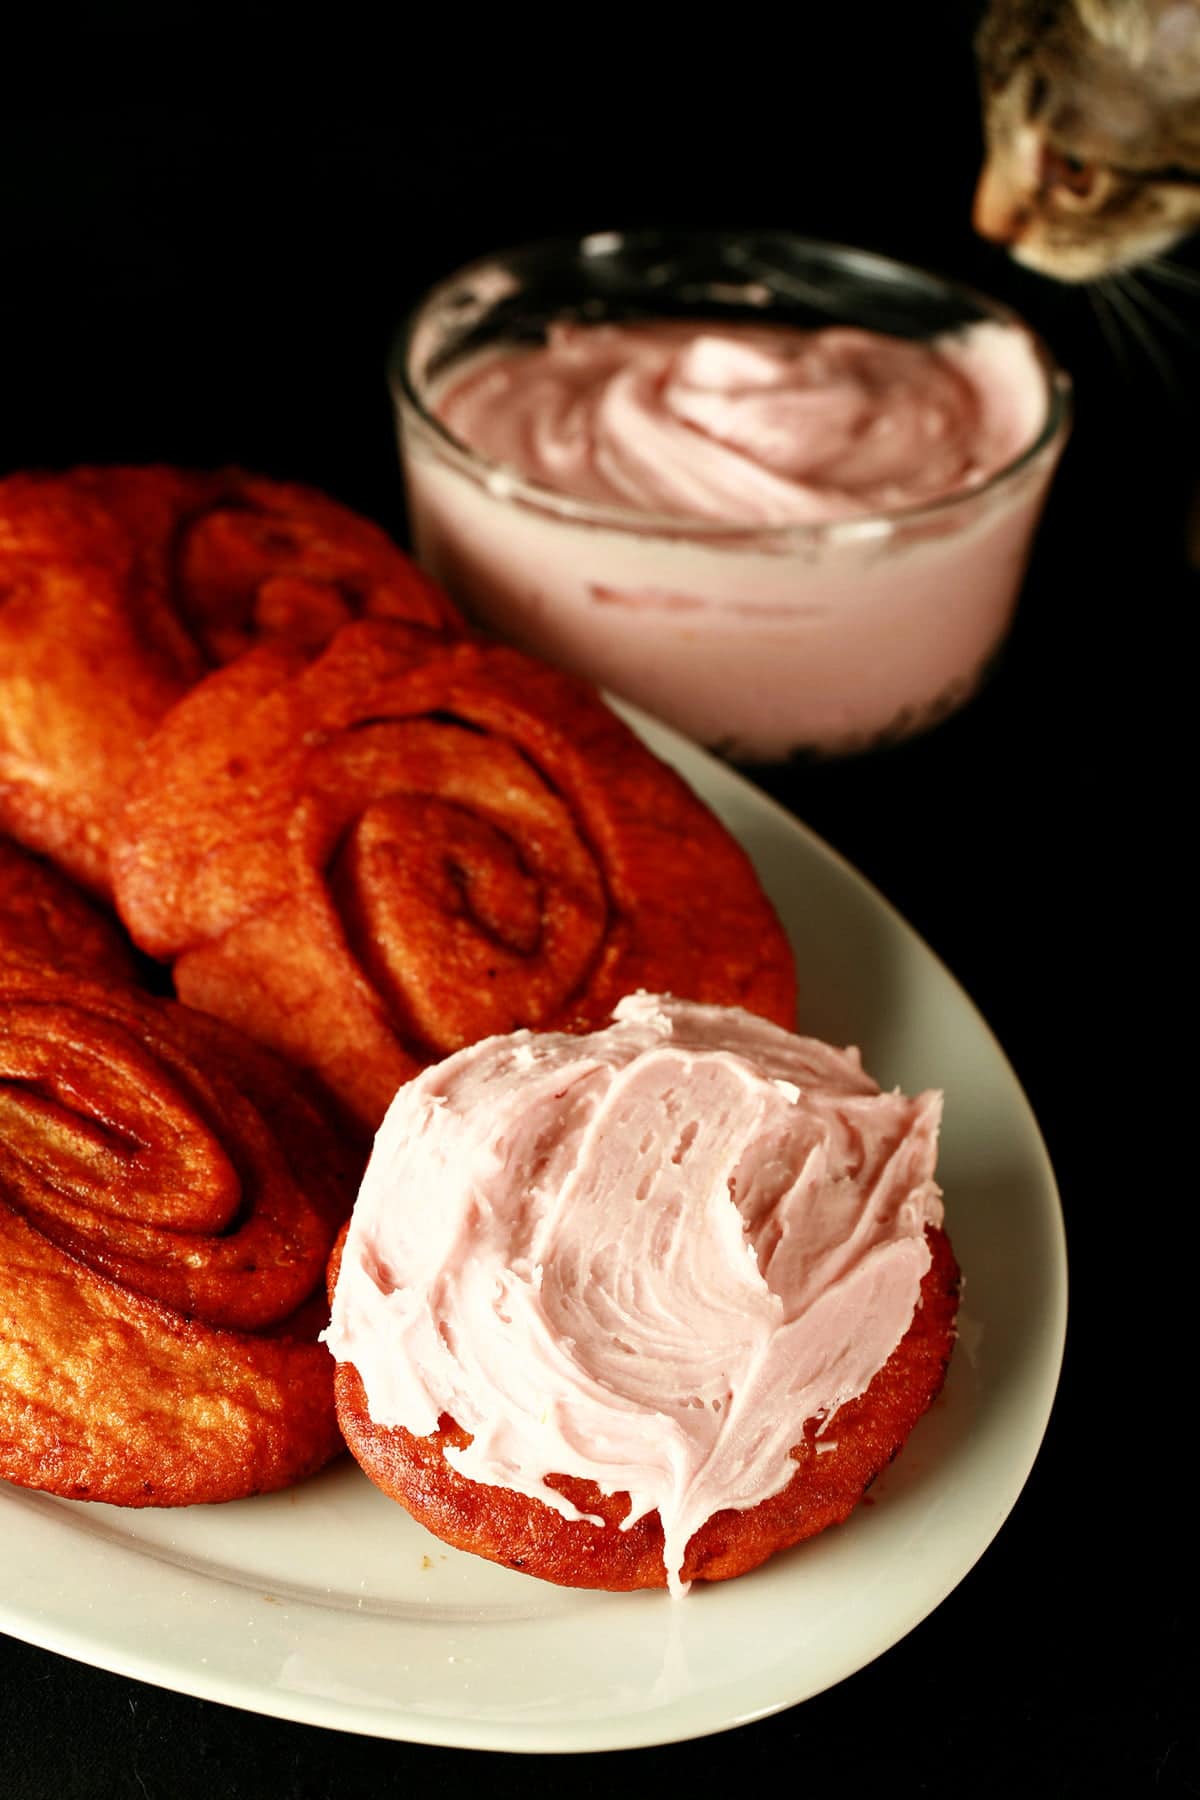 Deep fried cinnamon rolls are arranged on a white platter, one is spread with a pink frosting - A Persian roll! A grey tabby cat looks on.